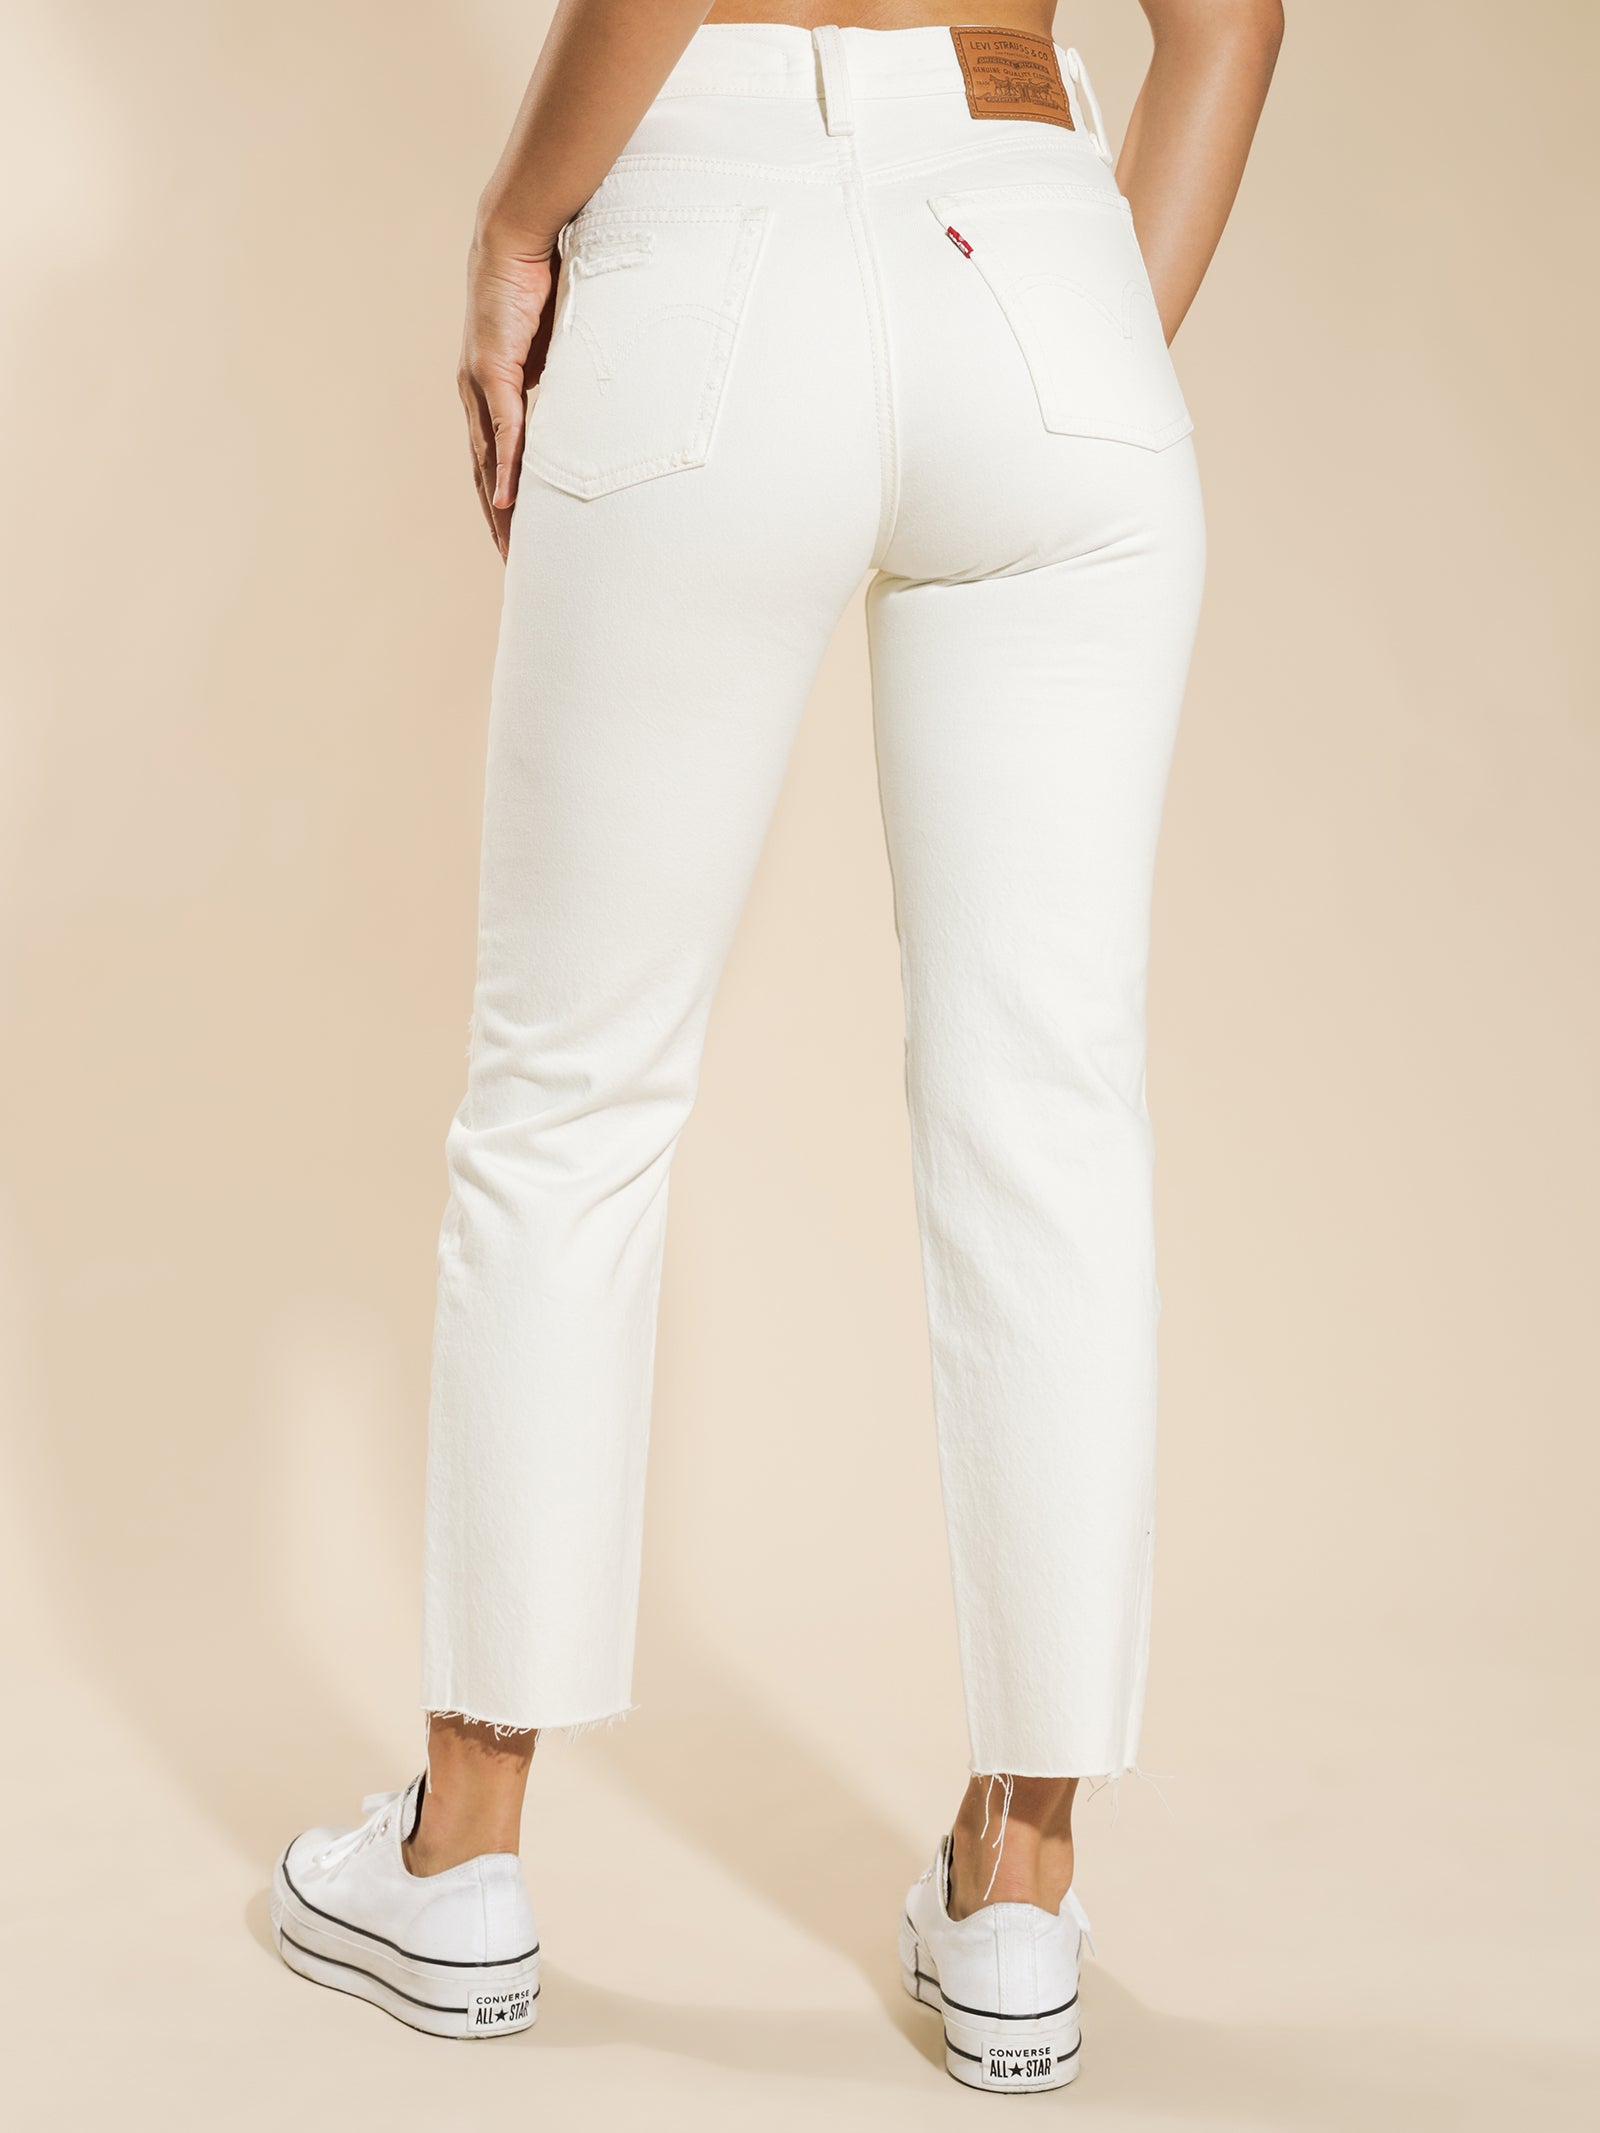 Wedgie Fit Straight Jeans in Cloud Bank - Glue Store